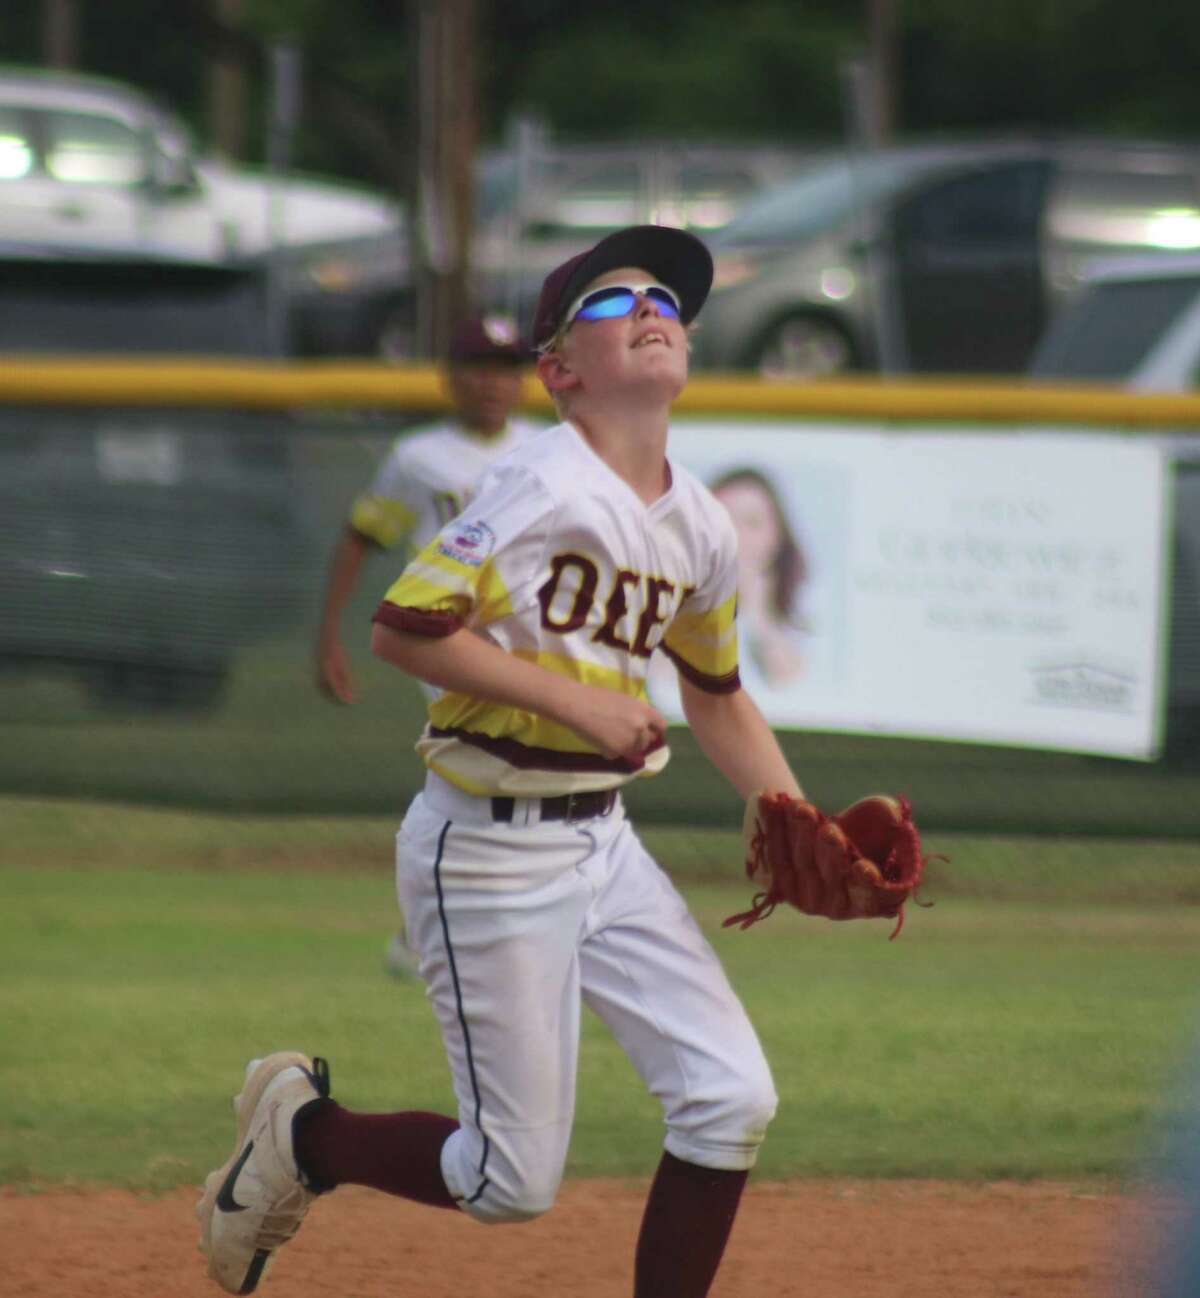 Deer Park Bronco all-star Cody Hickman tries to find an infield fly ball Saturday afternoon against a Friendswood team. Cody is back on the diamond at noon Sunday, looking for a berth in Monday's title game.